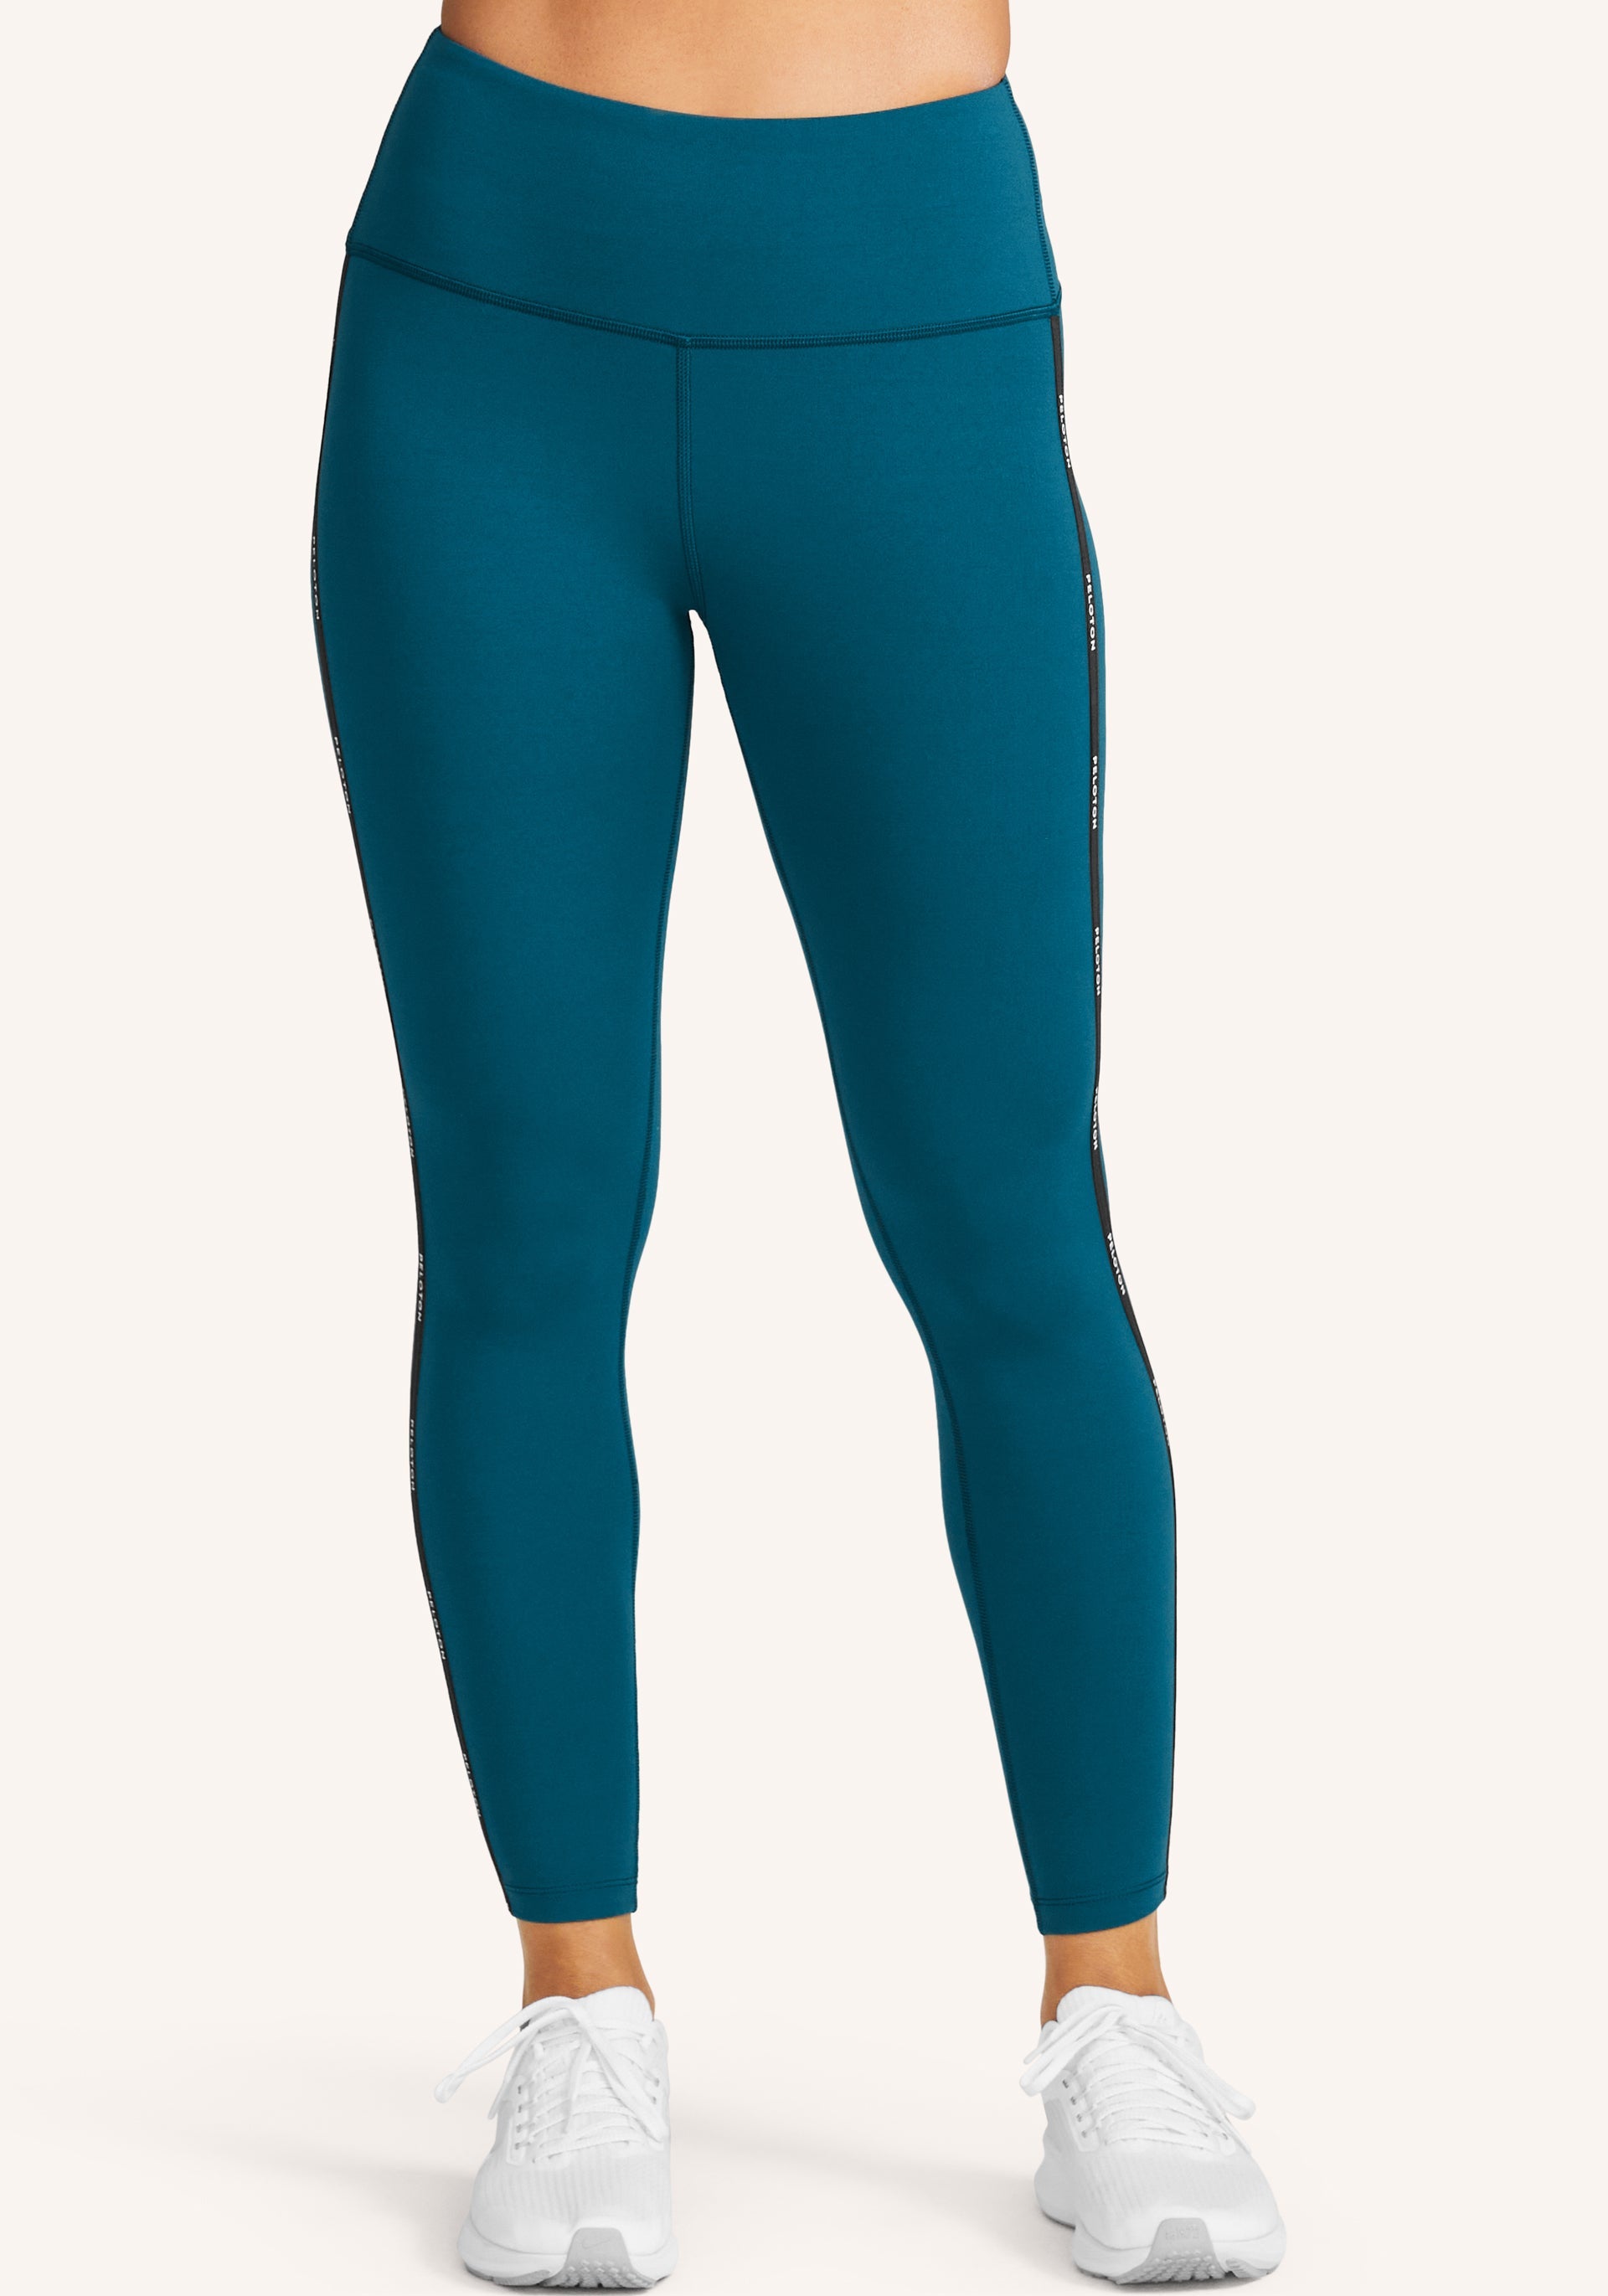 Solid Forest Teal Leggings with Wide Waist Band – Heartbreak Boutique